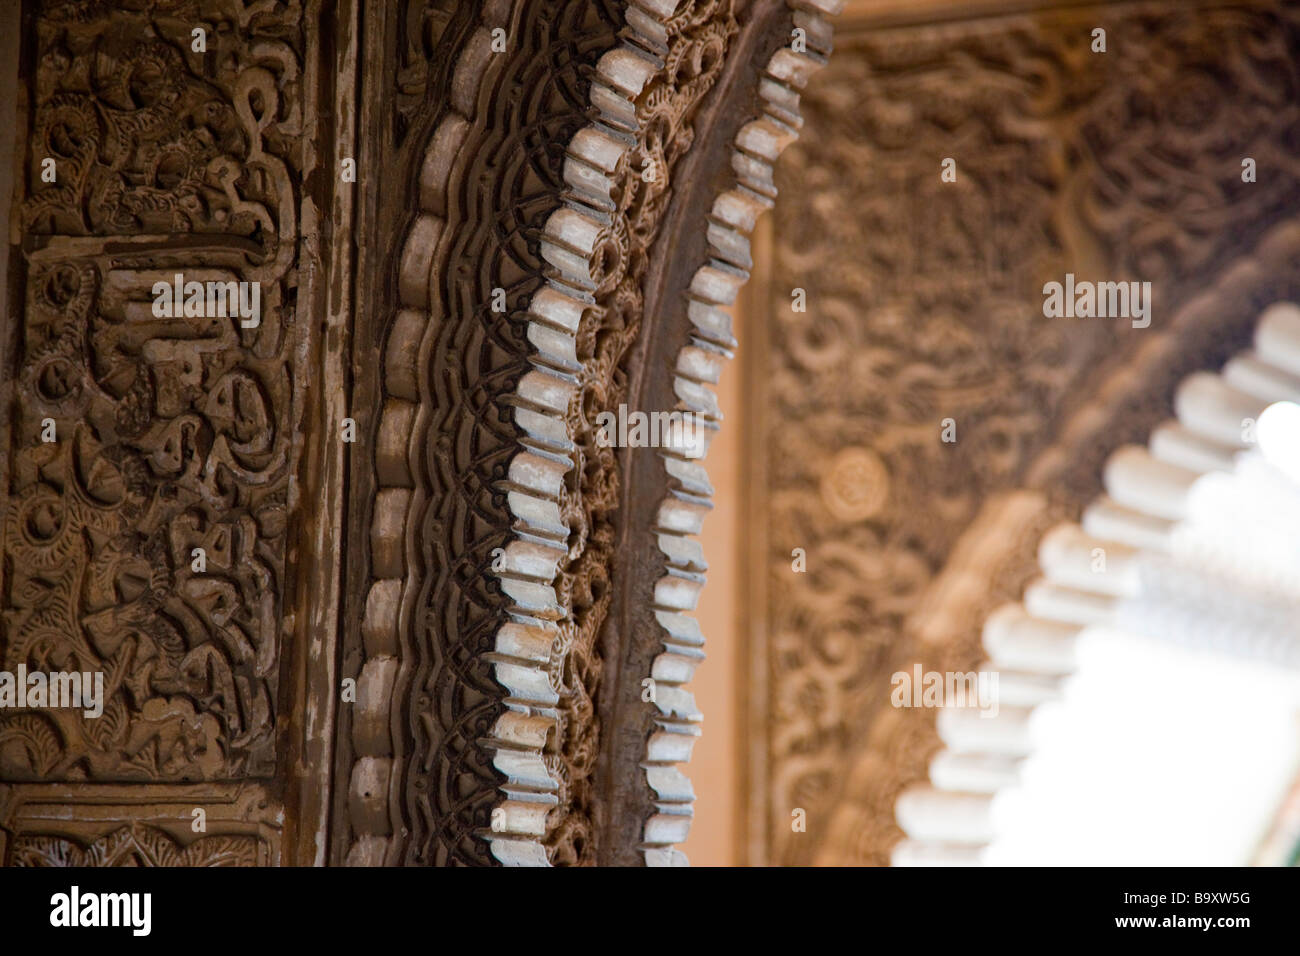 Islamic Architecture Detail at the Dar al Horra Palace in Granada Spain Stock Photo